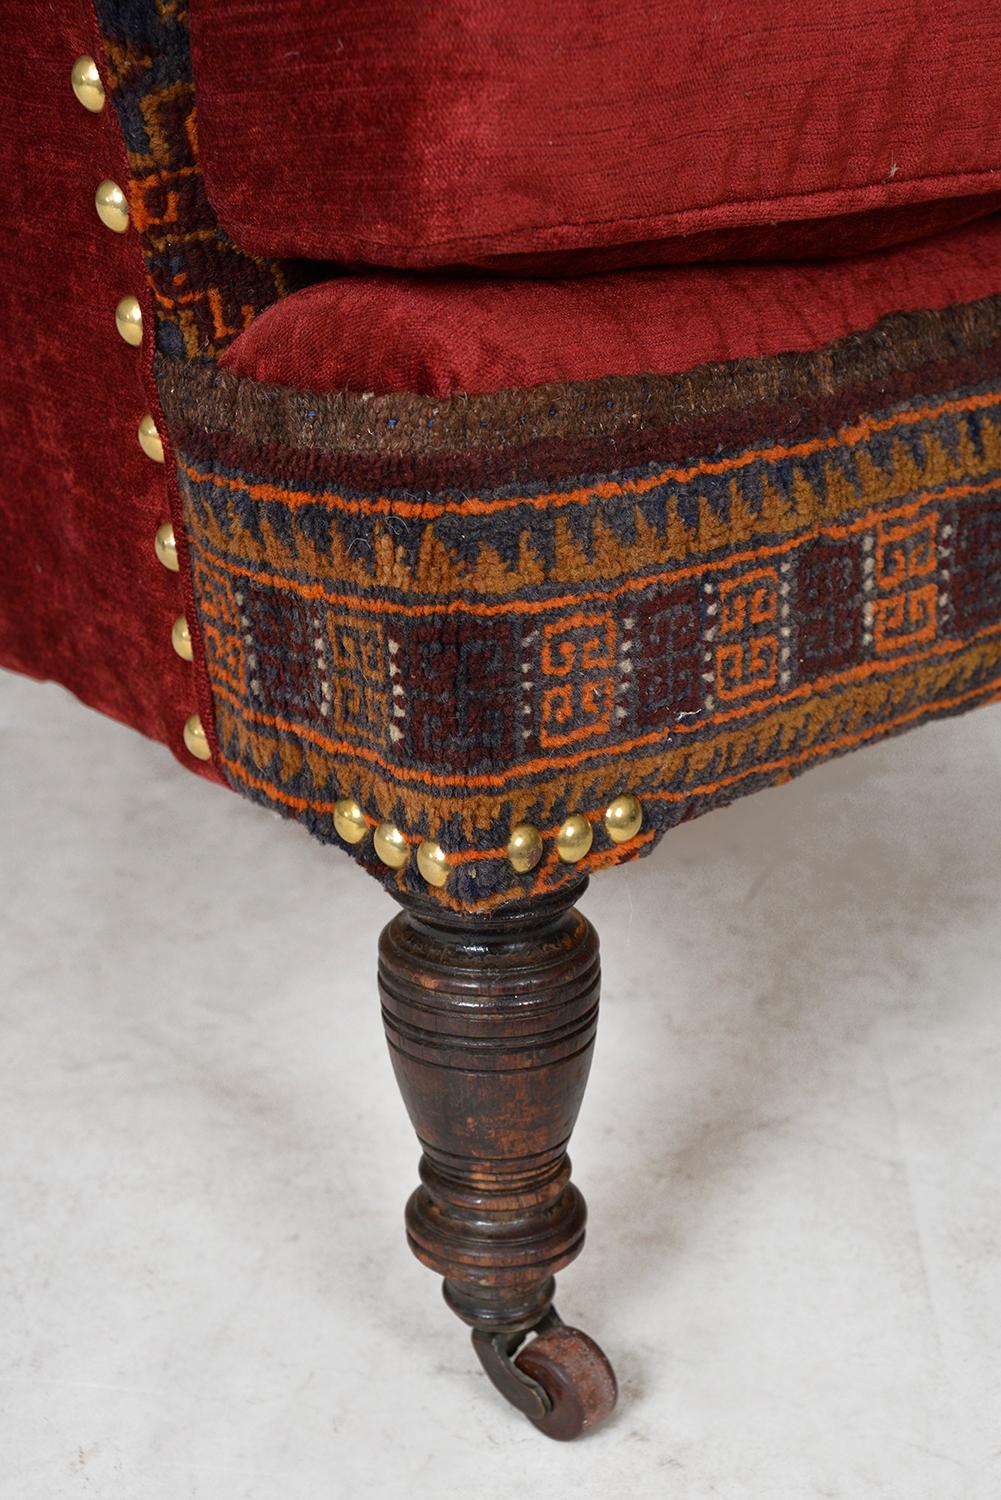  Antique Baluch Rug Carpet Chair Library Armchair Victorian Bohemian Upholstered 5